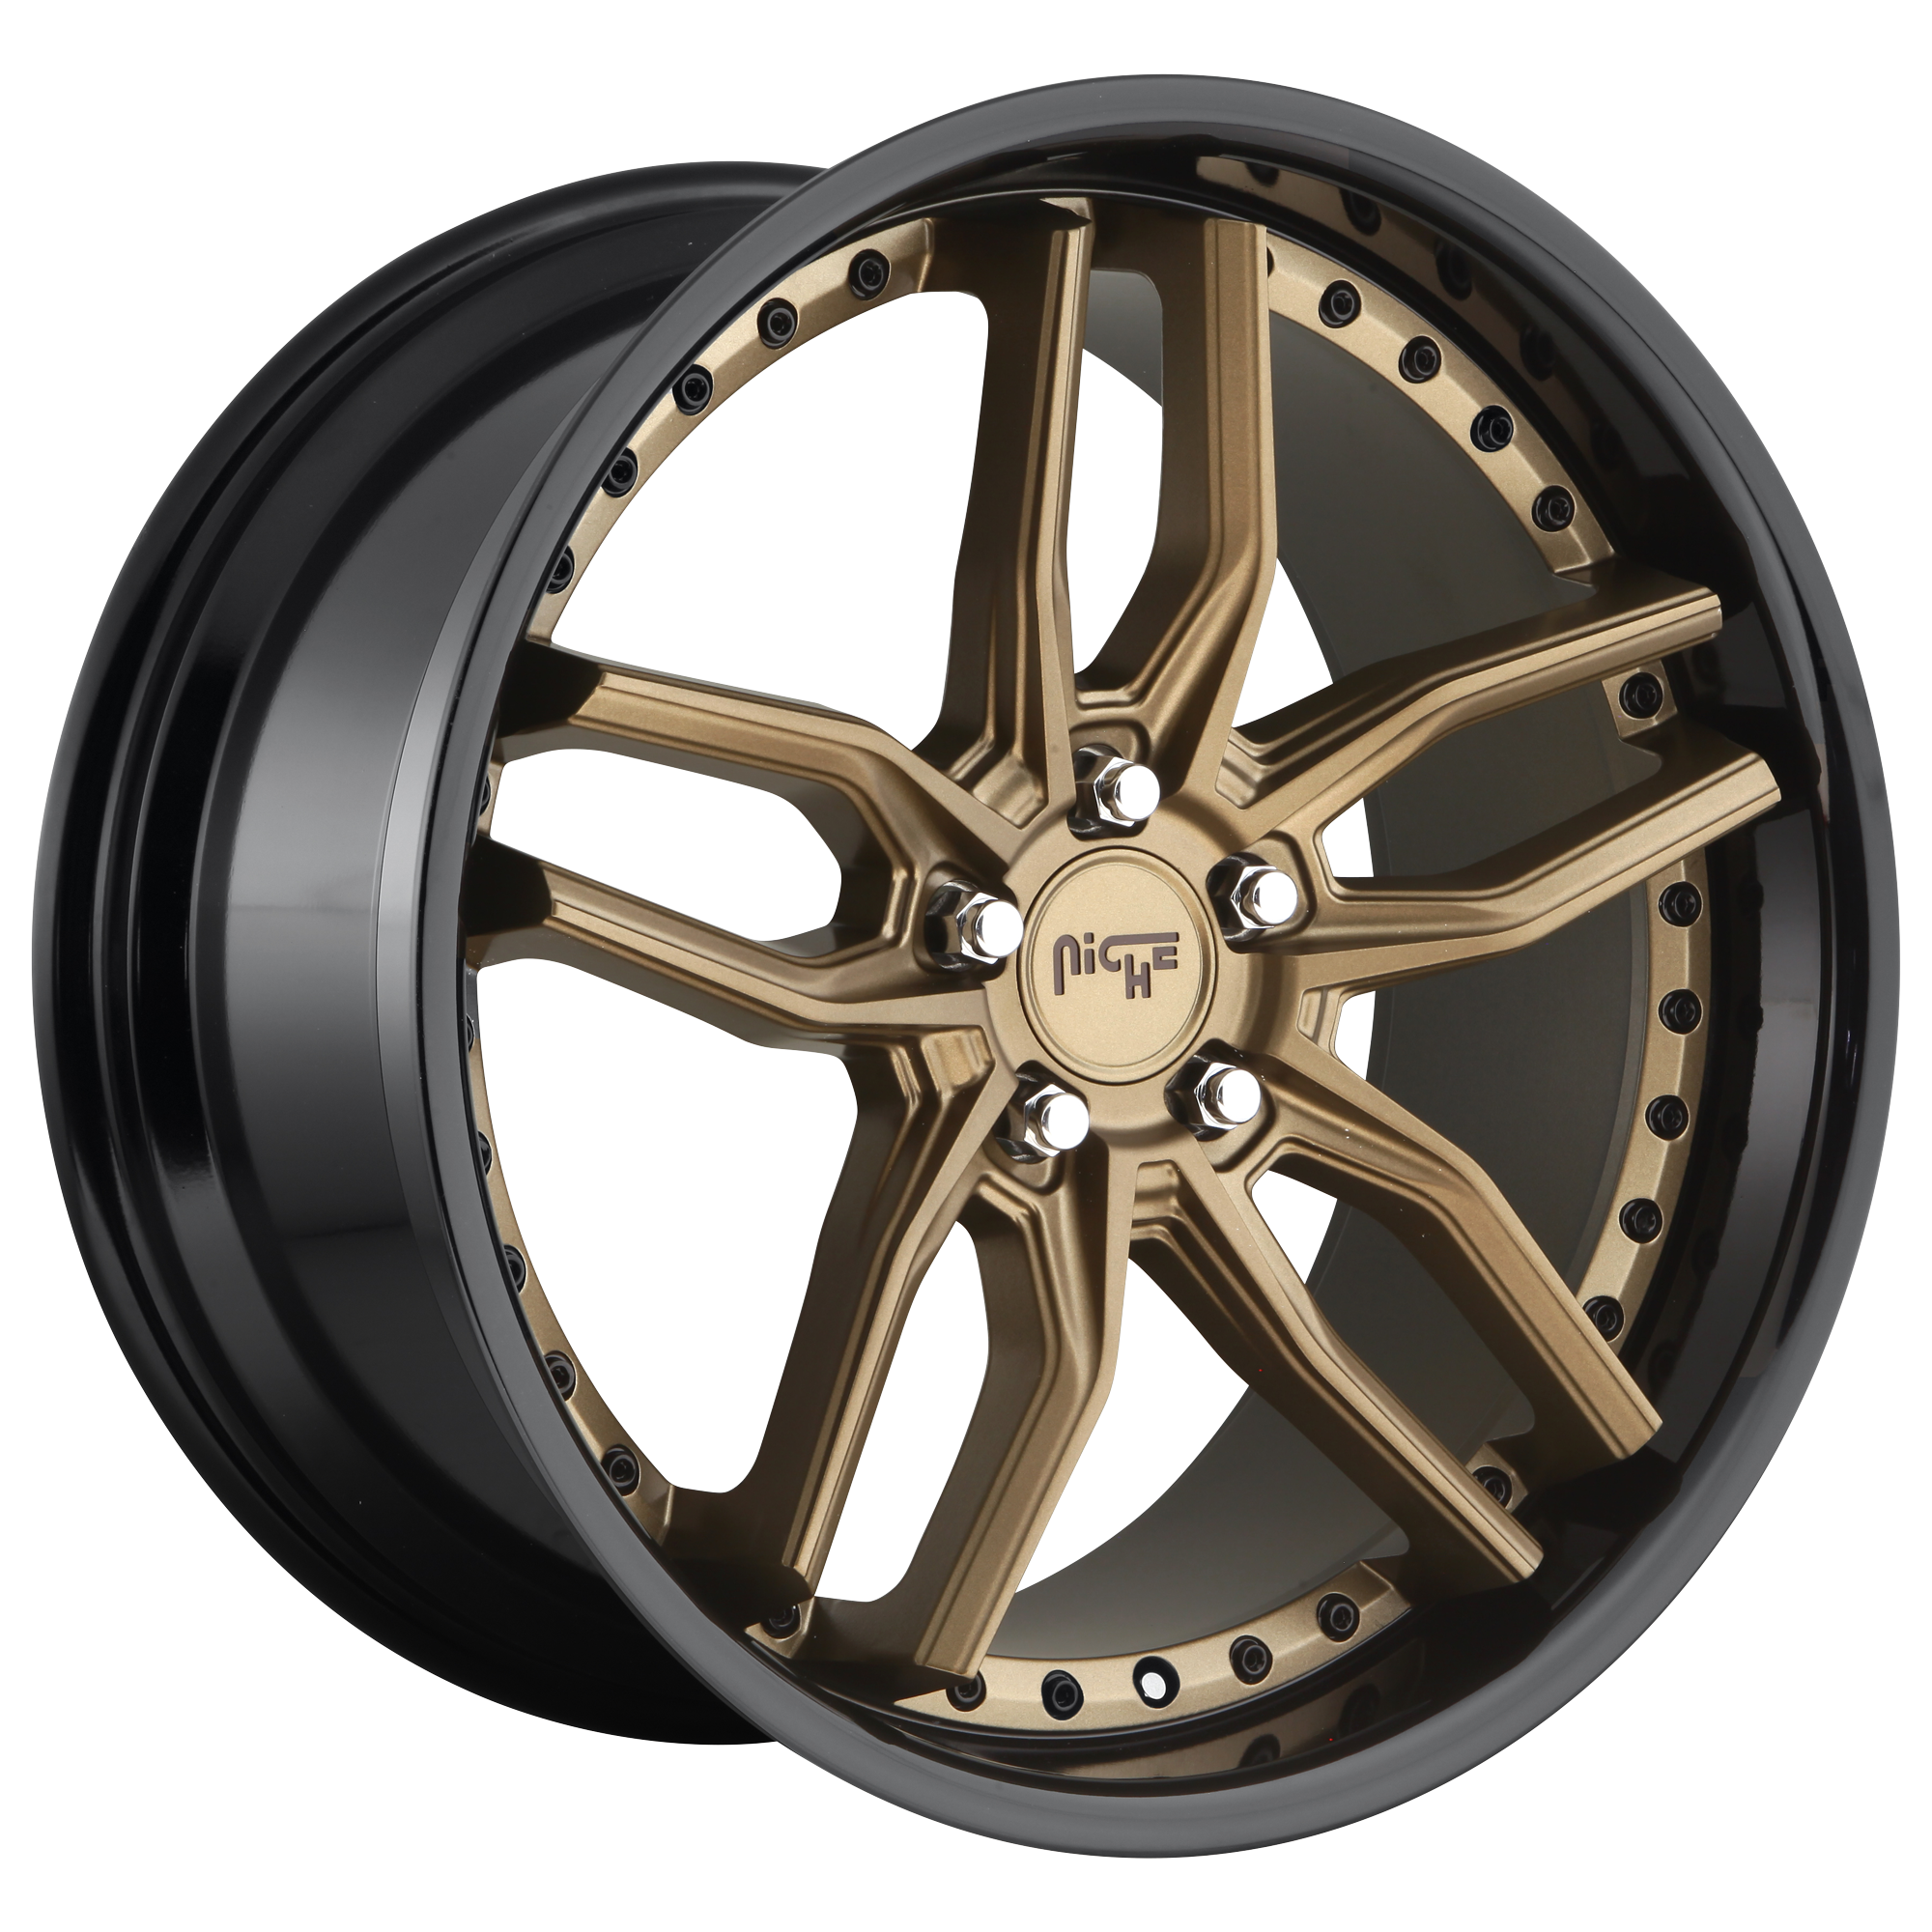 METHOS 19x8.5 5x112.00 MATTE BRONZE BLACK BEAD RING (42 mm) - Tires and Engine Performance